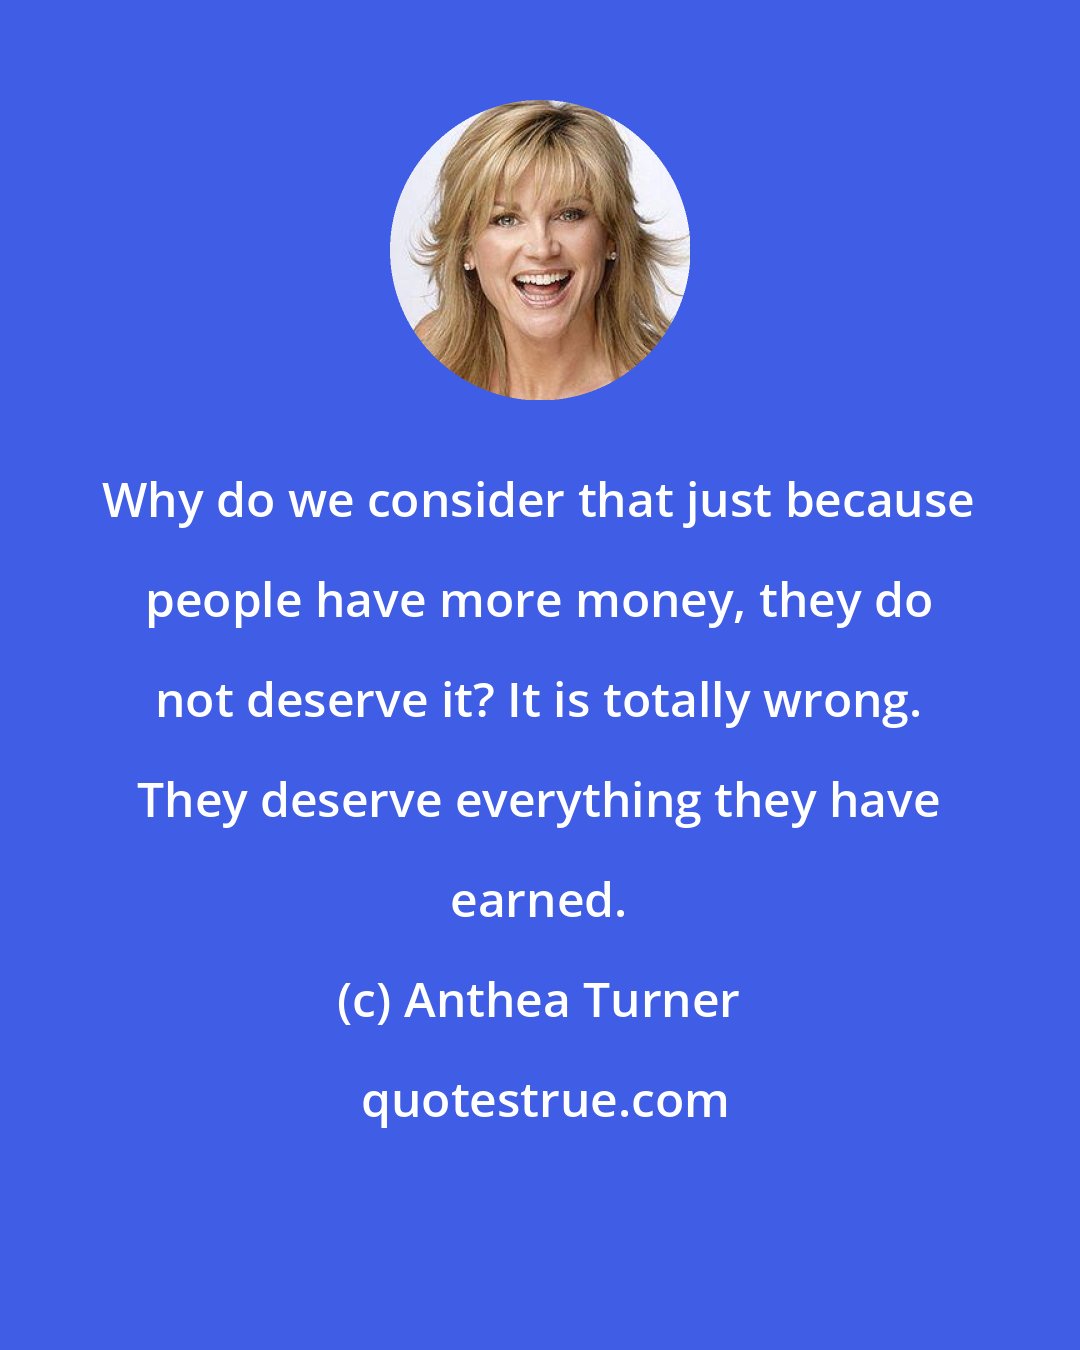 Anthea Turner: Why do we consider that just because people have more money, they do not deserve it? It is totally wrong. They deserve everything they have earned.